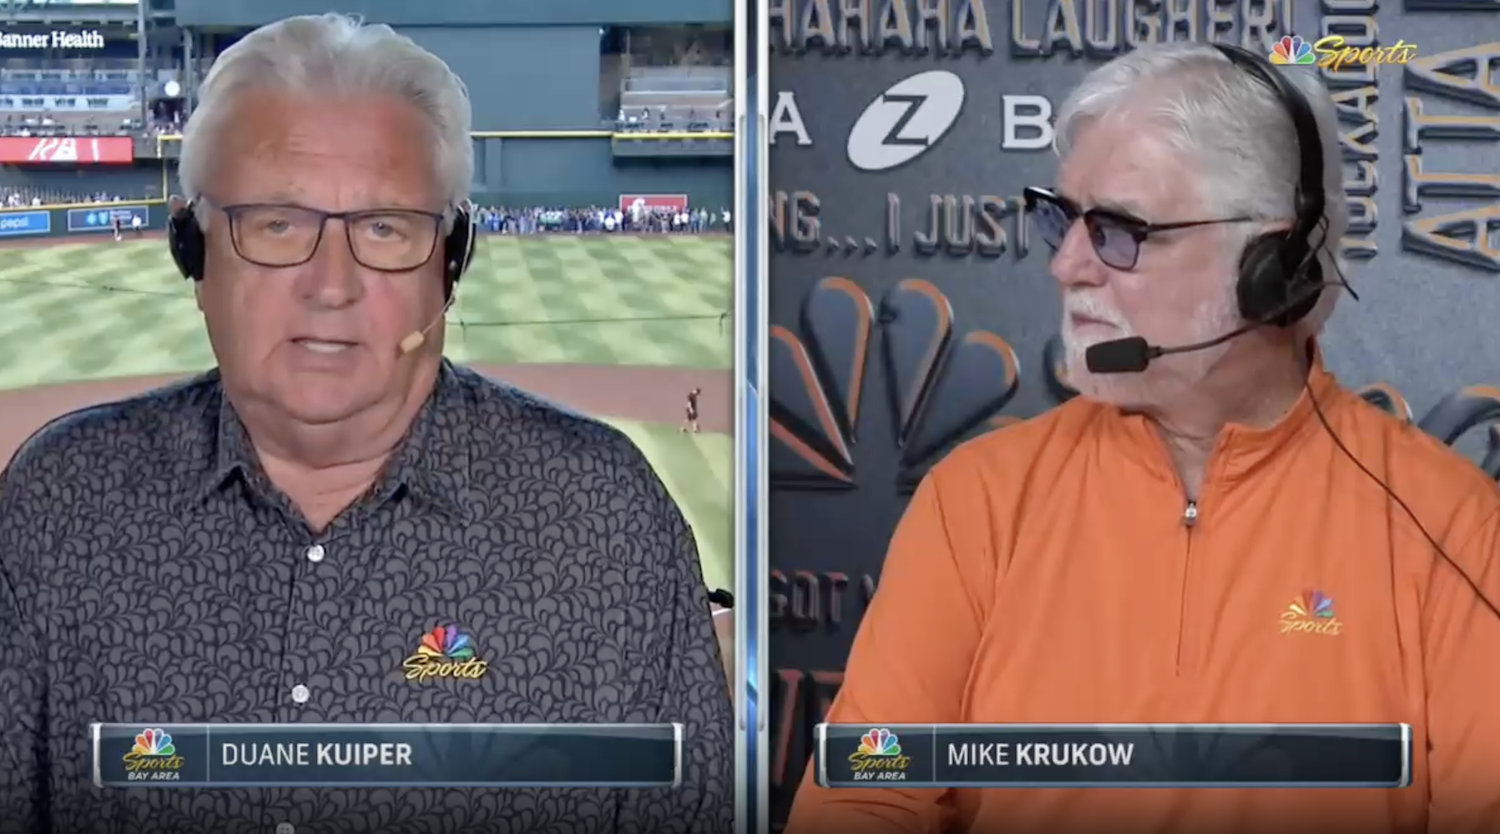 Giants announcer Duane Kuiper: ‘We’ll continue this conversation when we get back… I gotta pee’